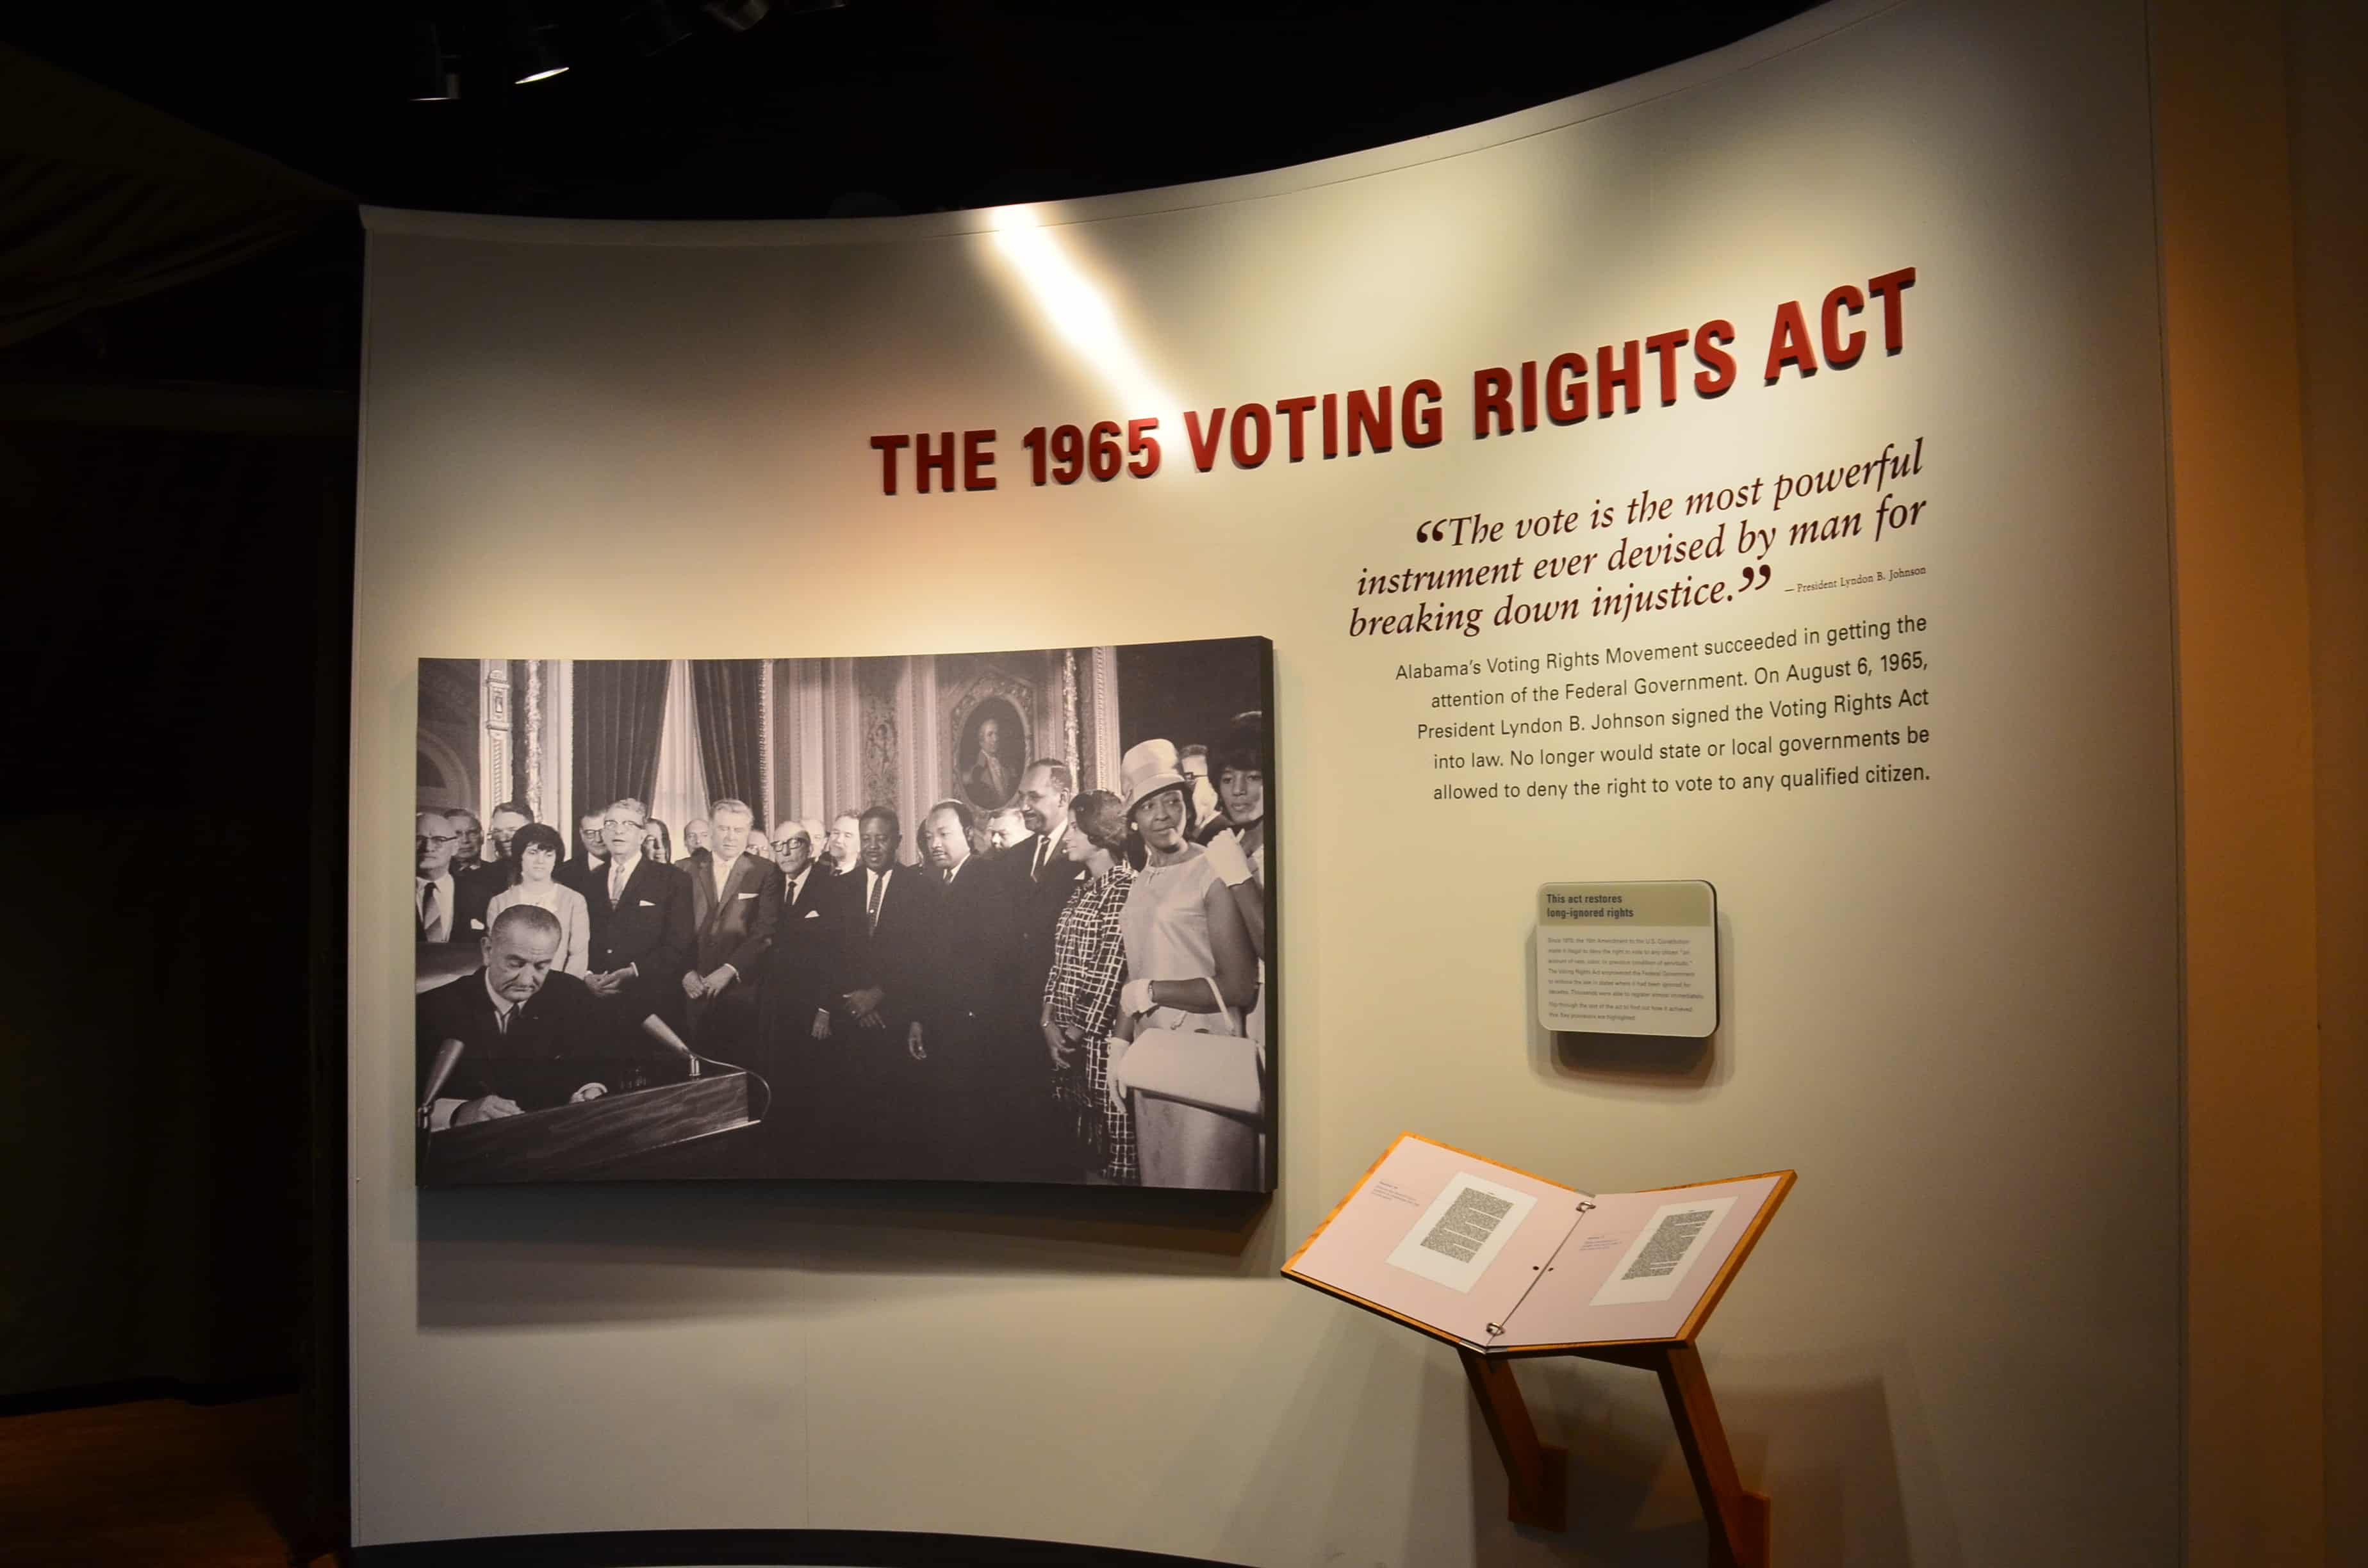 1965 Voting Rights Act at the Lowndes Interpretive Center on the Selma to Montgomery National Historic Trail in Alabama